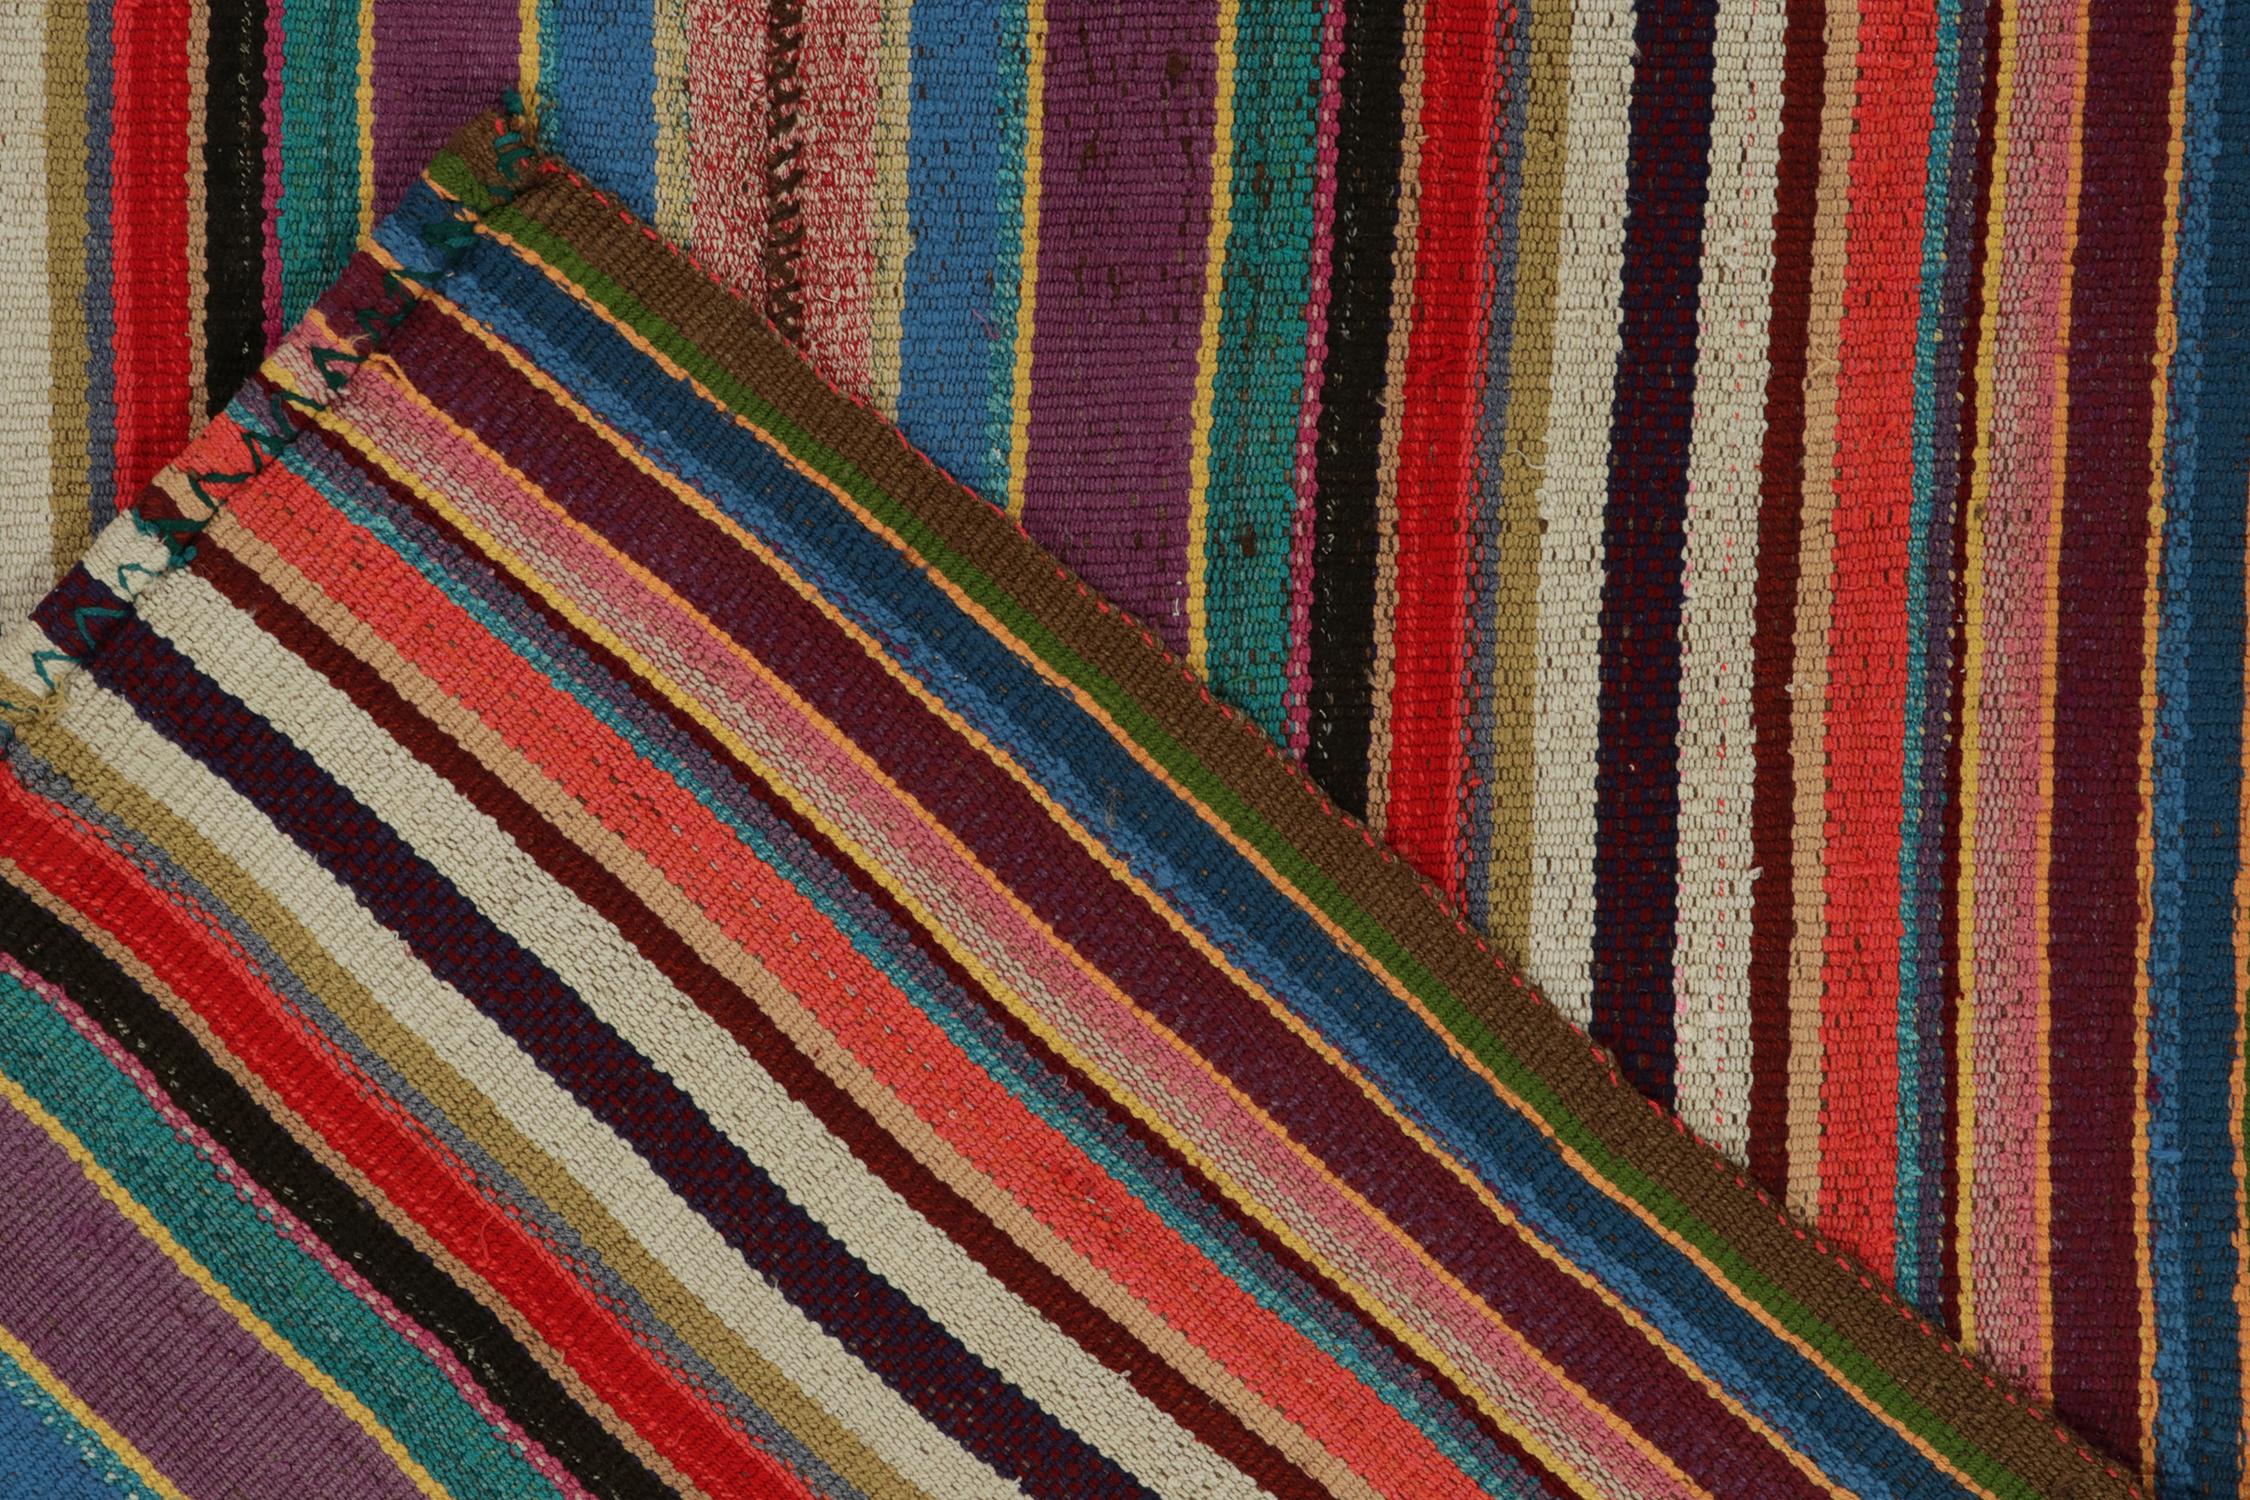 1950s Vintage Chaput Kilim Rug in Multicolor Stripes, Patterns by Rug & Kilim In Good Condition For Sale In Long Island City, NY